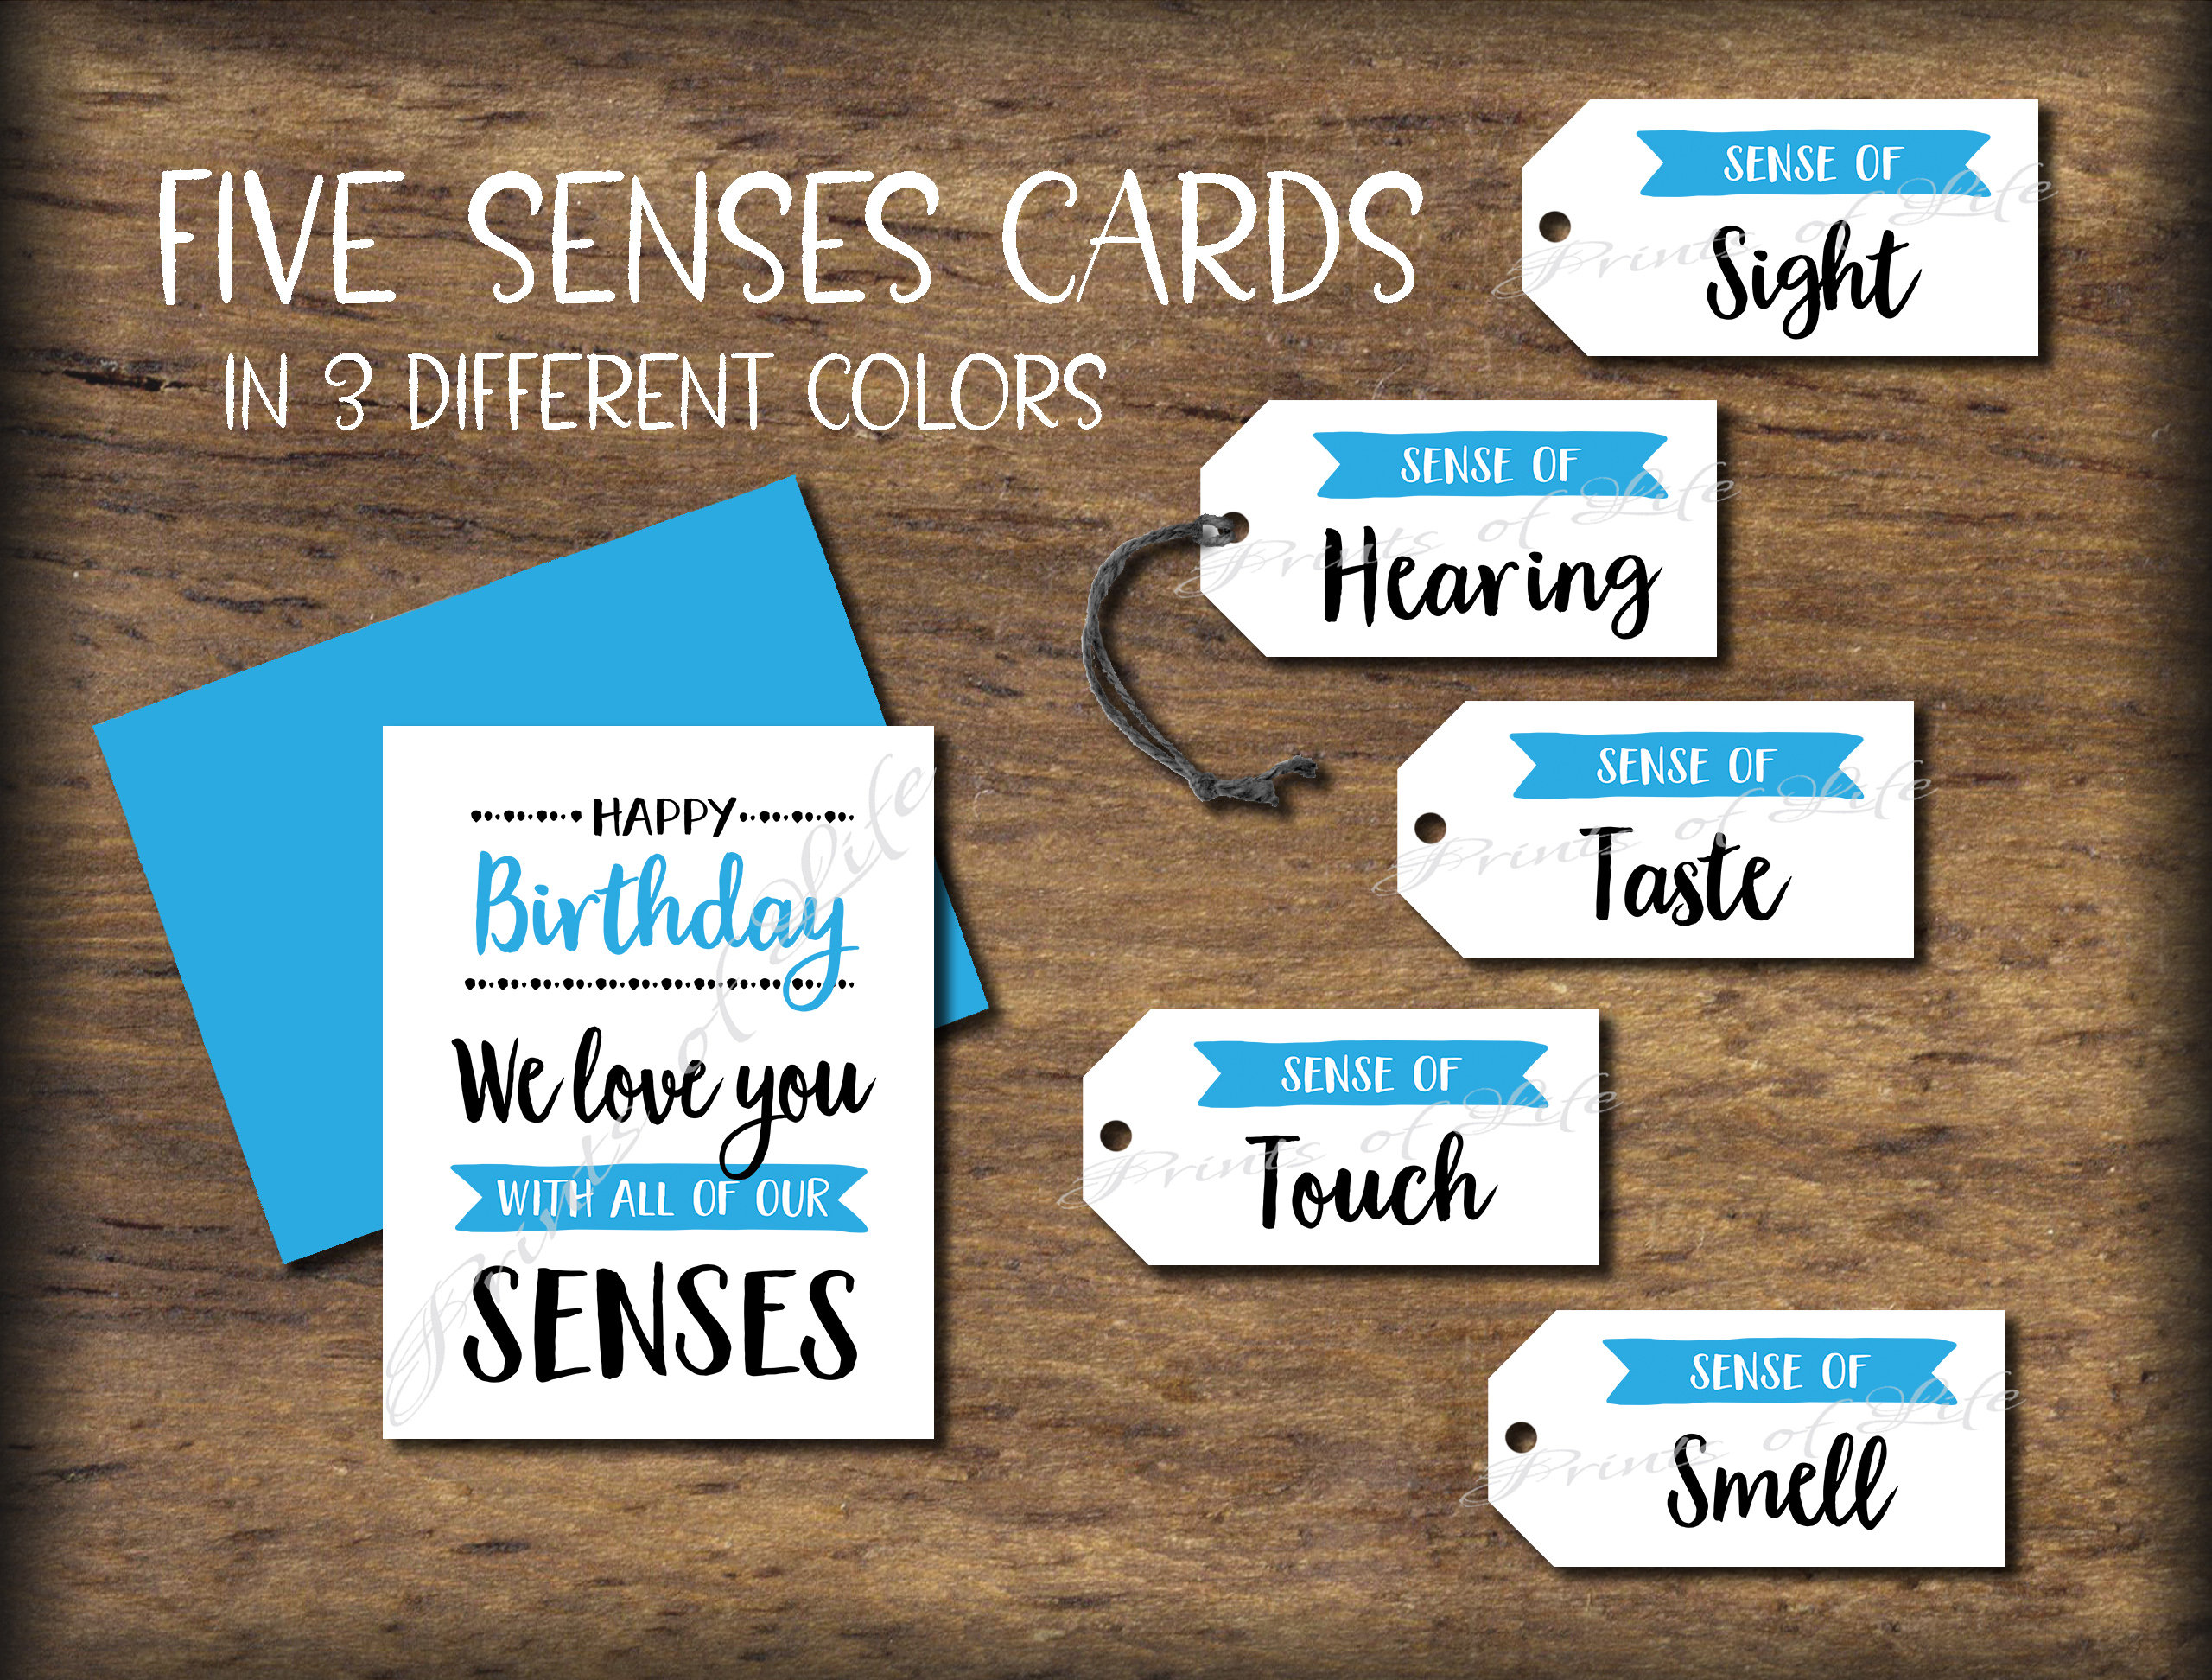 25 of the Best 5 Senses Gift Ideas - Gift Willow